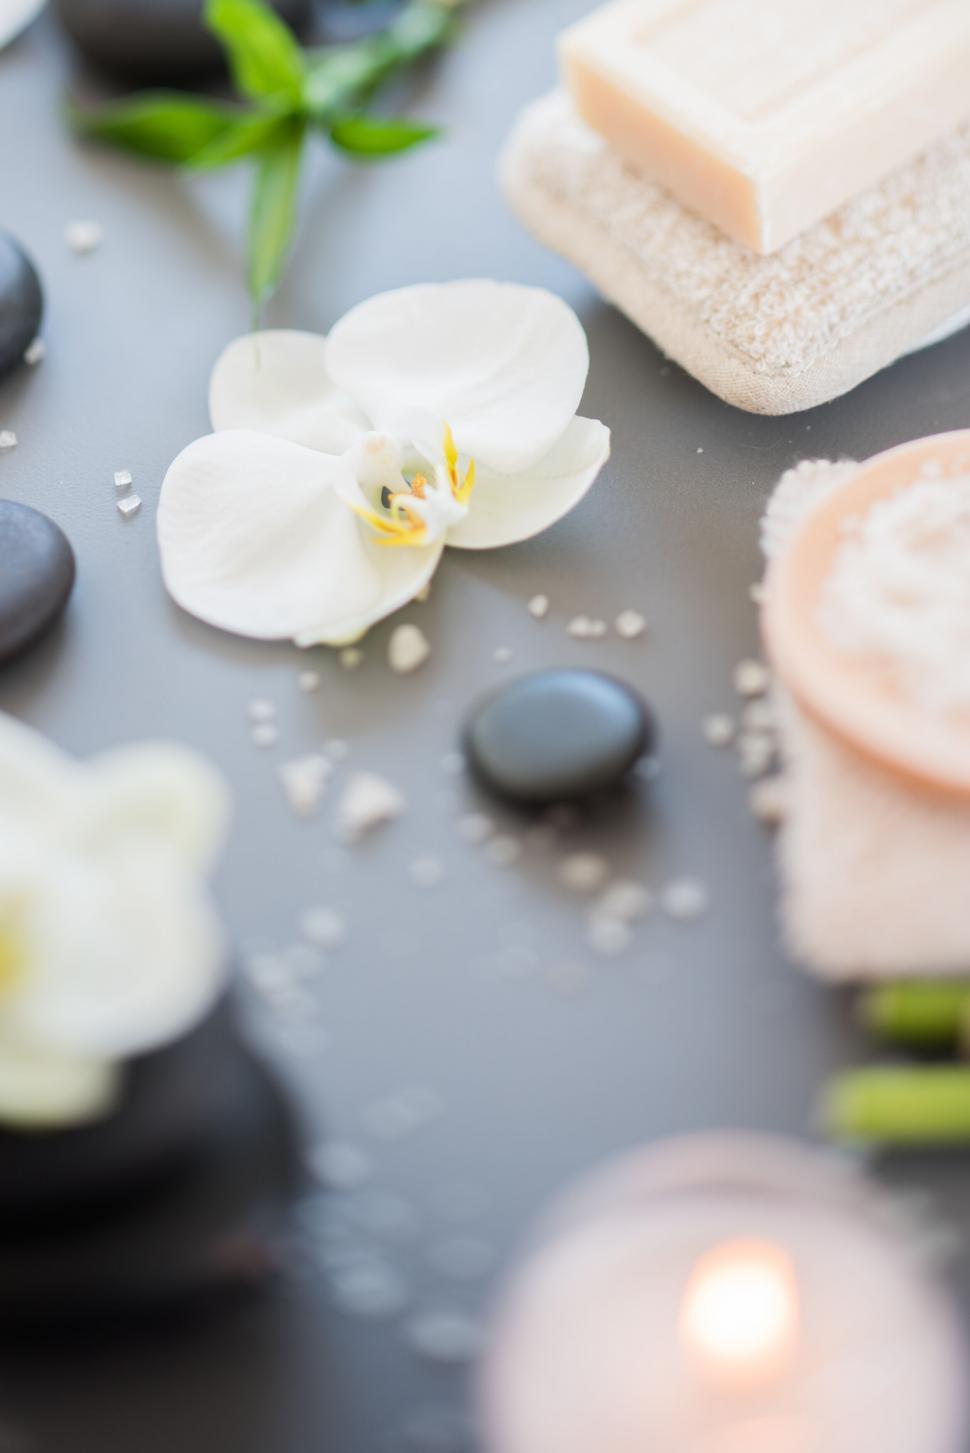 Free Image of Spa setting with candle and bath items 